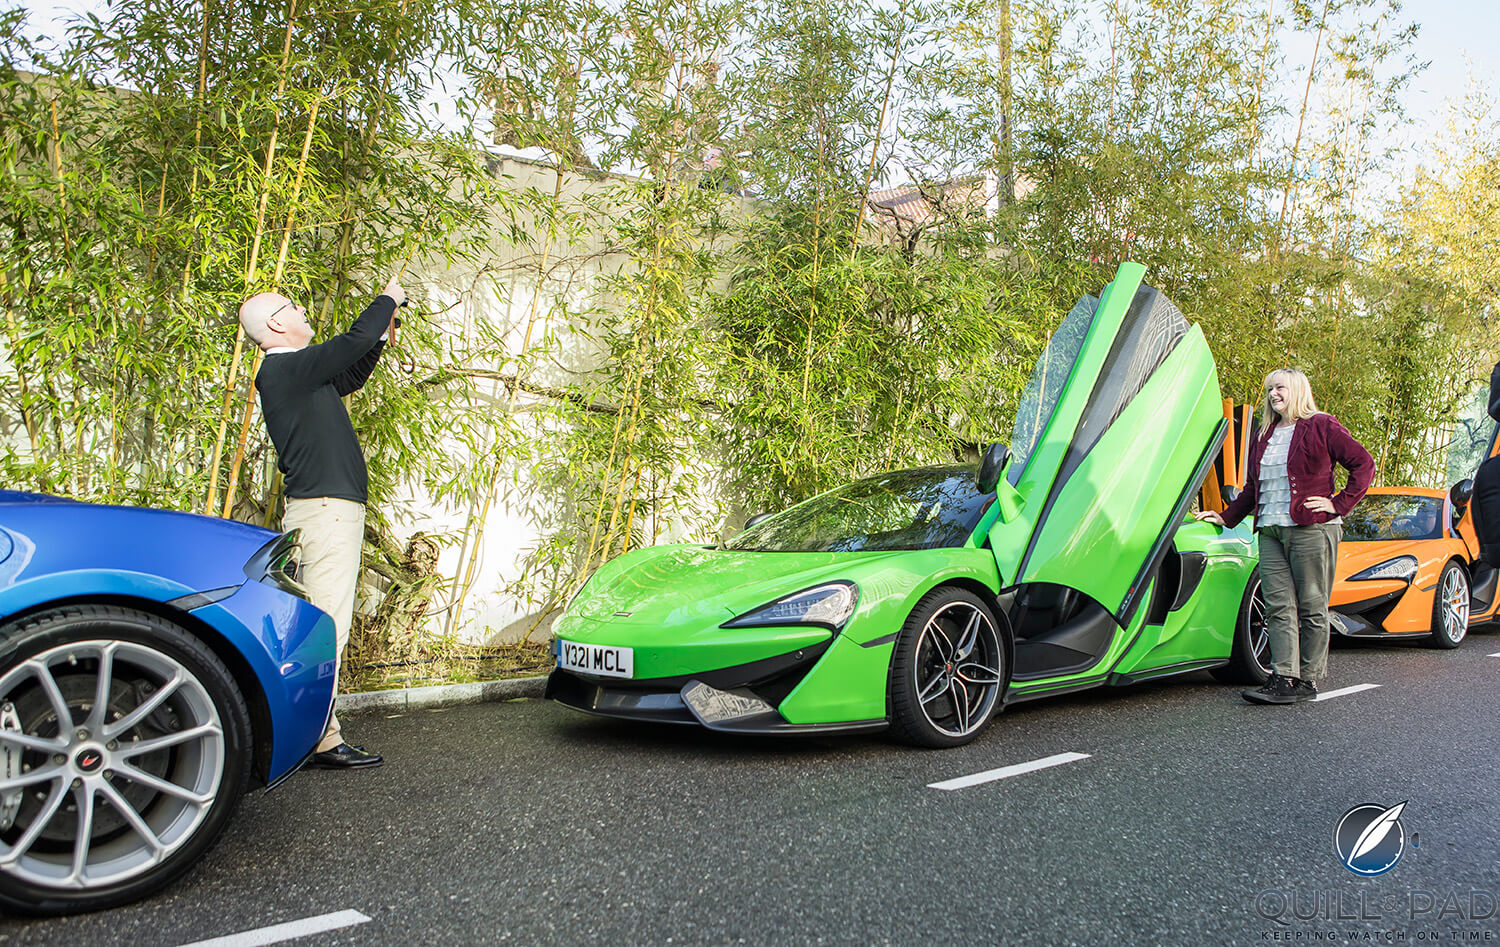 The author getting ready to drive the McLaren 570s Coupé (photo courtesy Mike Dodd/Beadyeye)